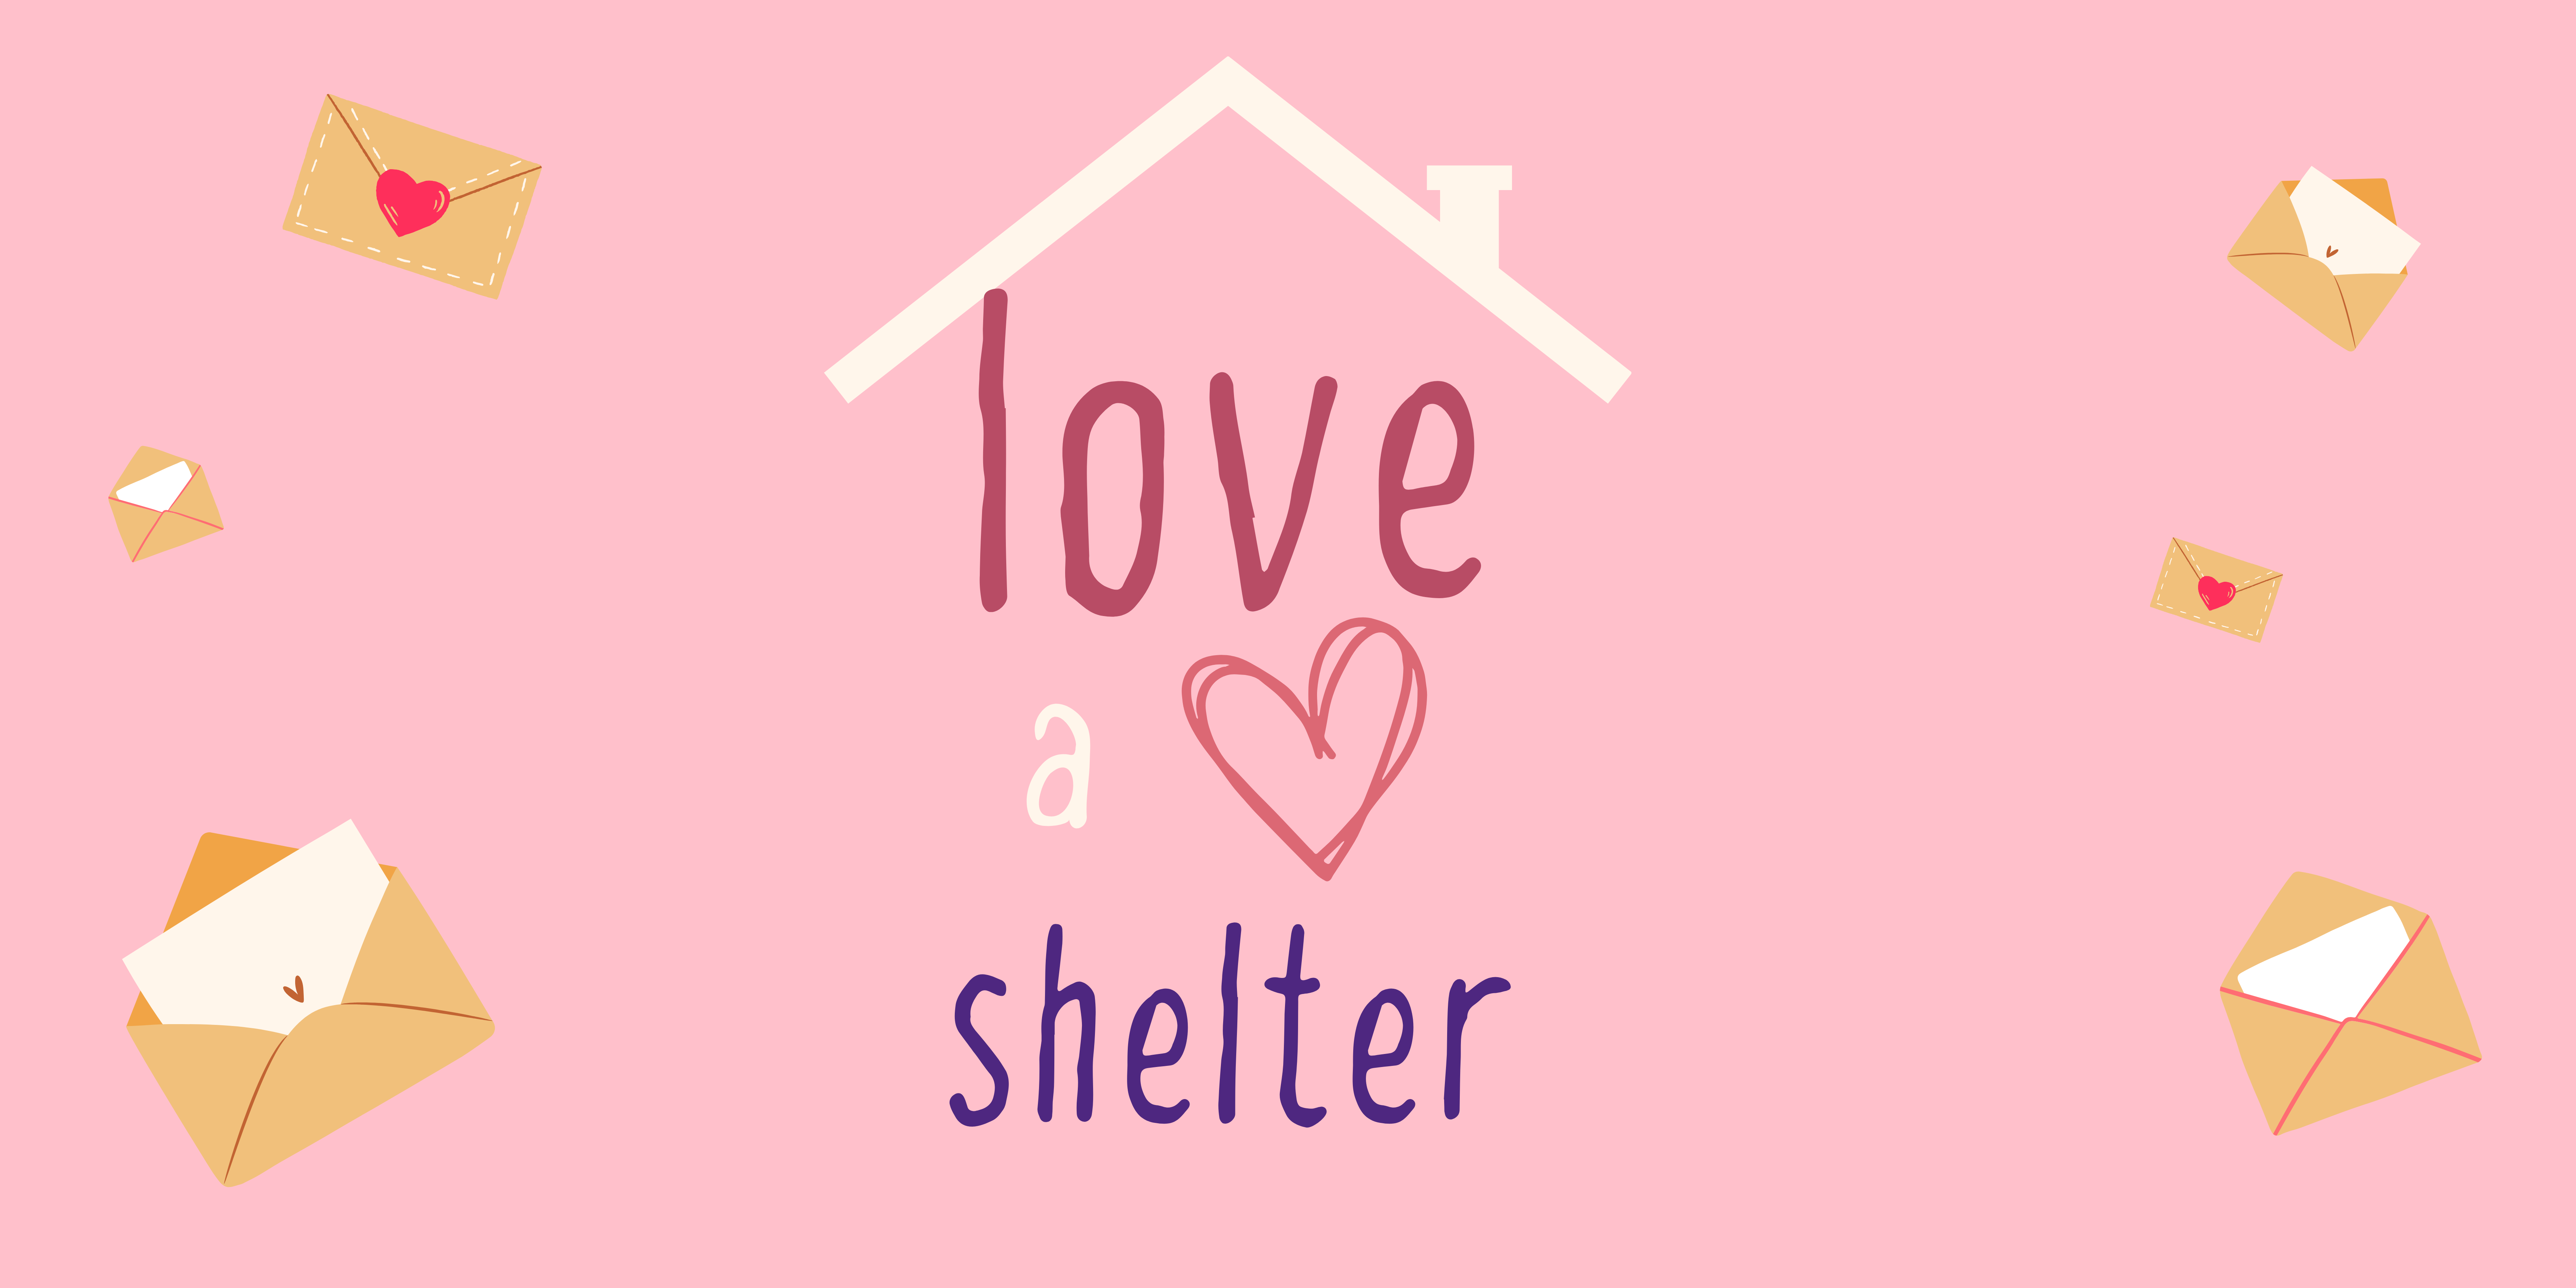 love a shelter campaign for domestic violence shelters